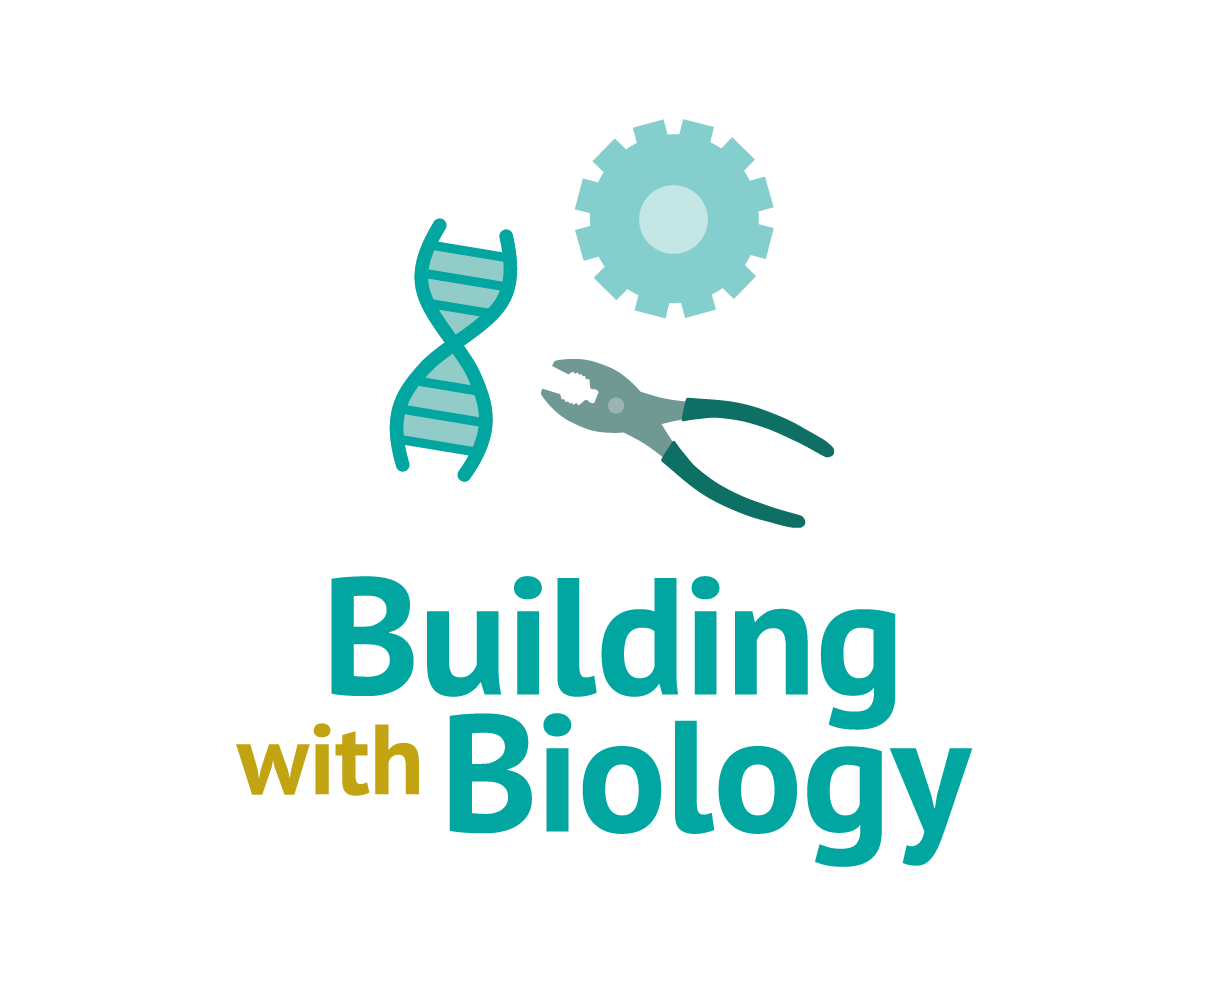 Building with Biology full color squared logo